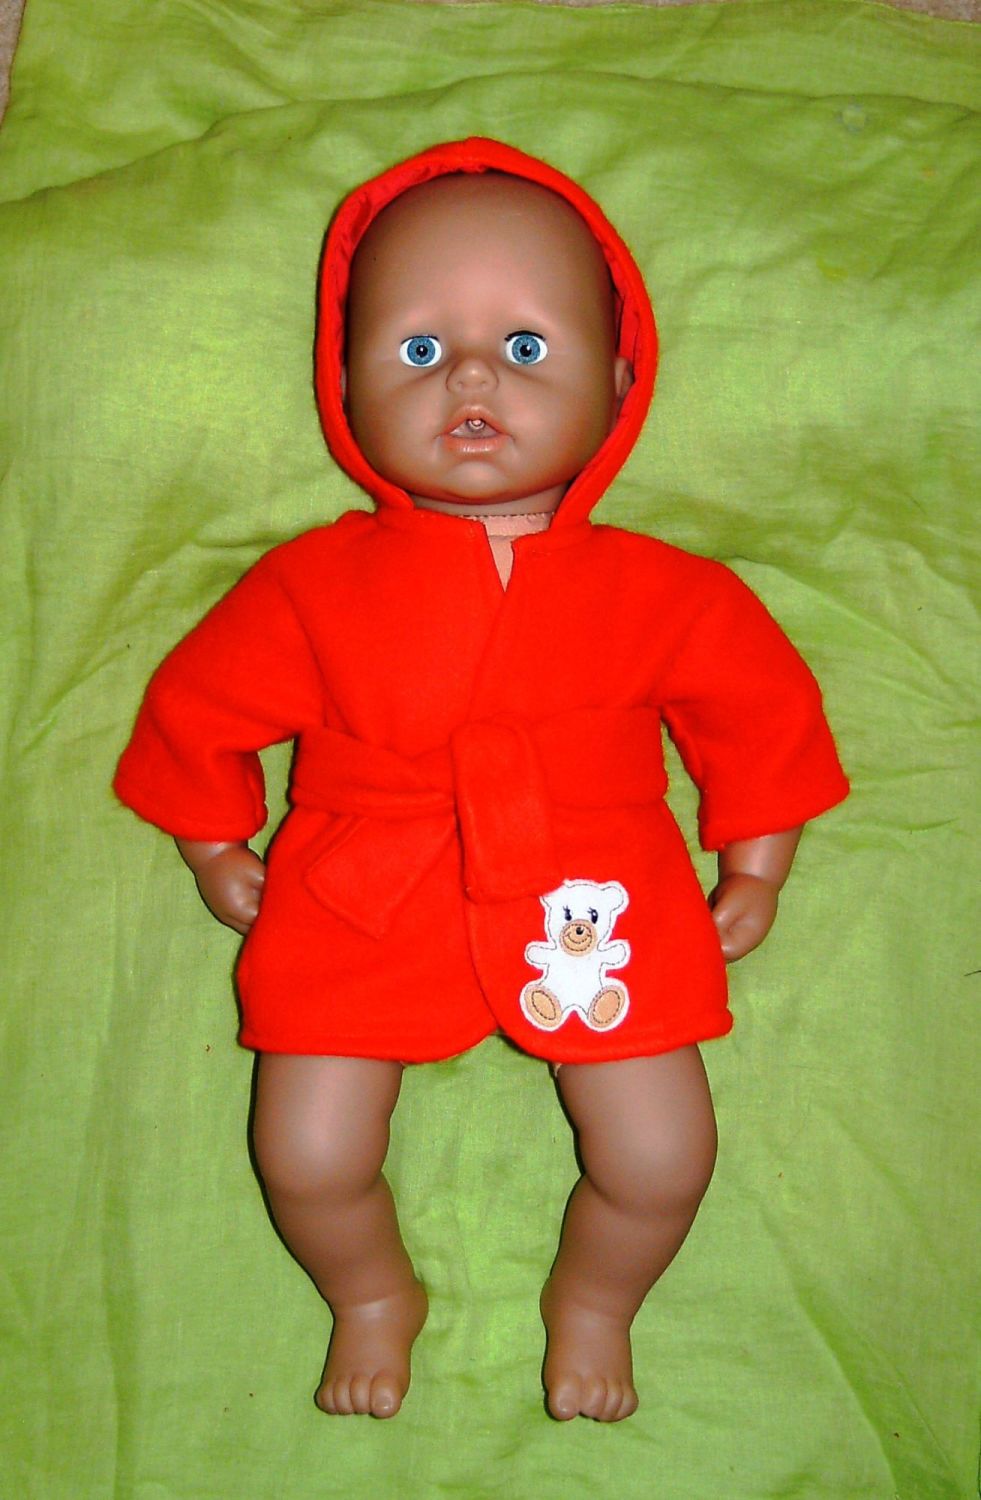 Bathrobe made for the 18 inch high baby George doll